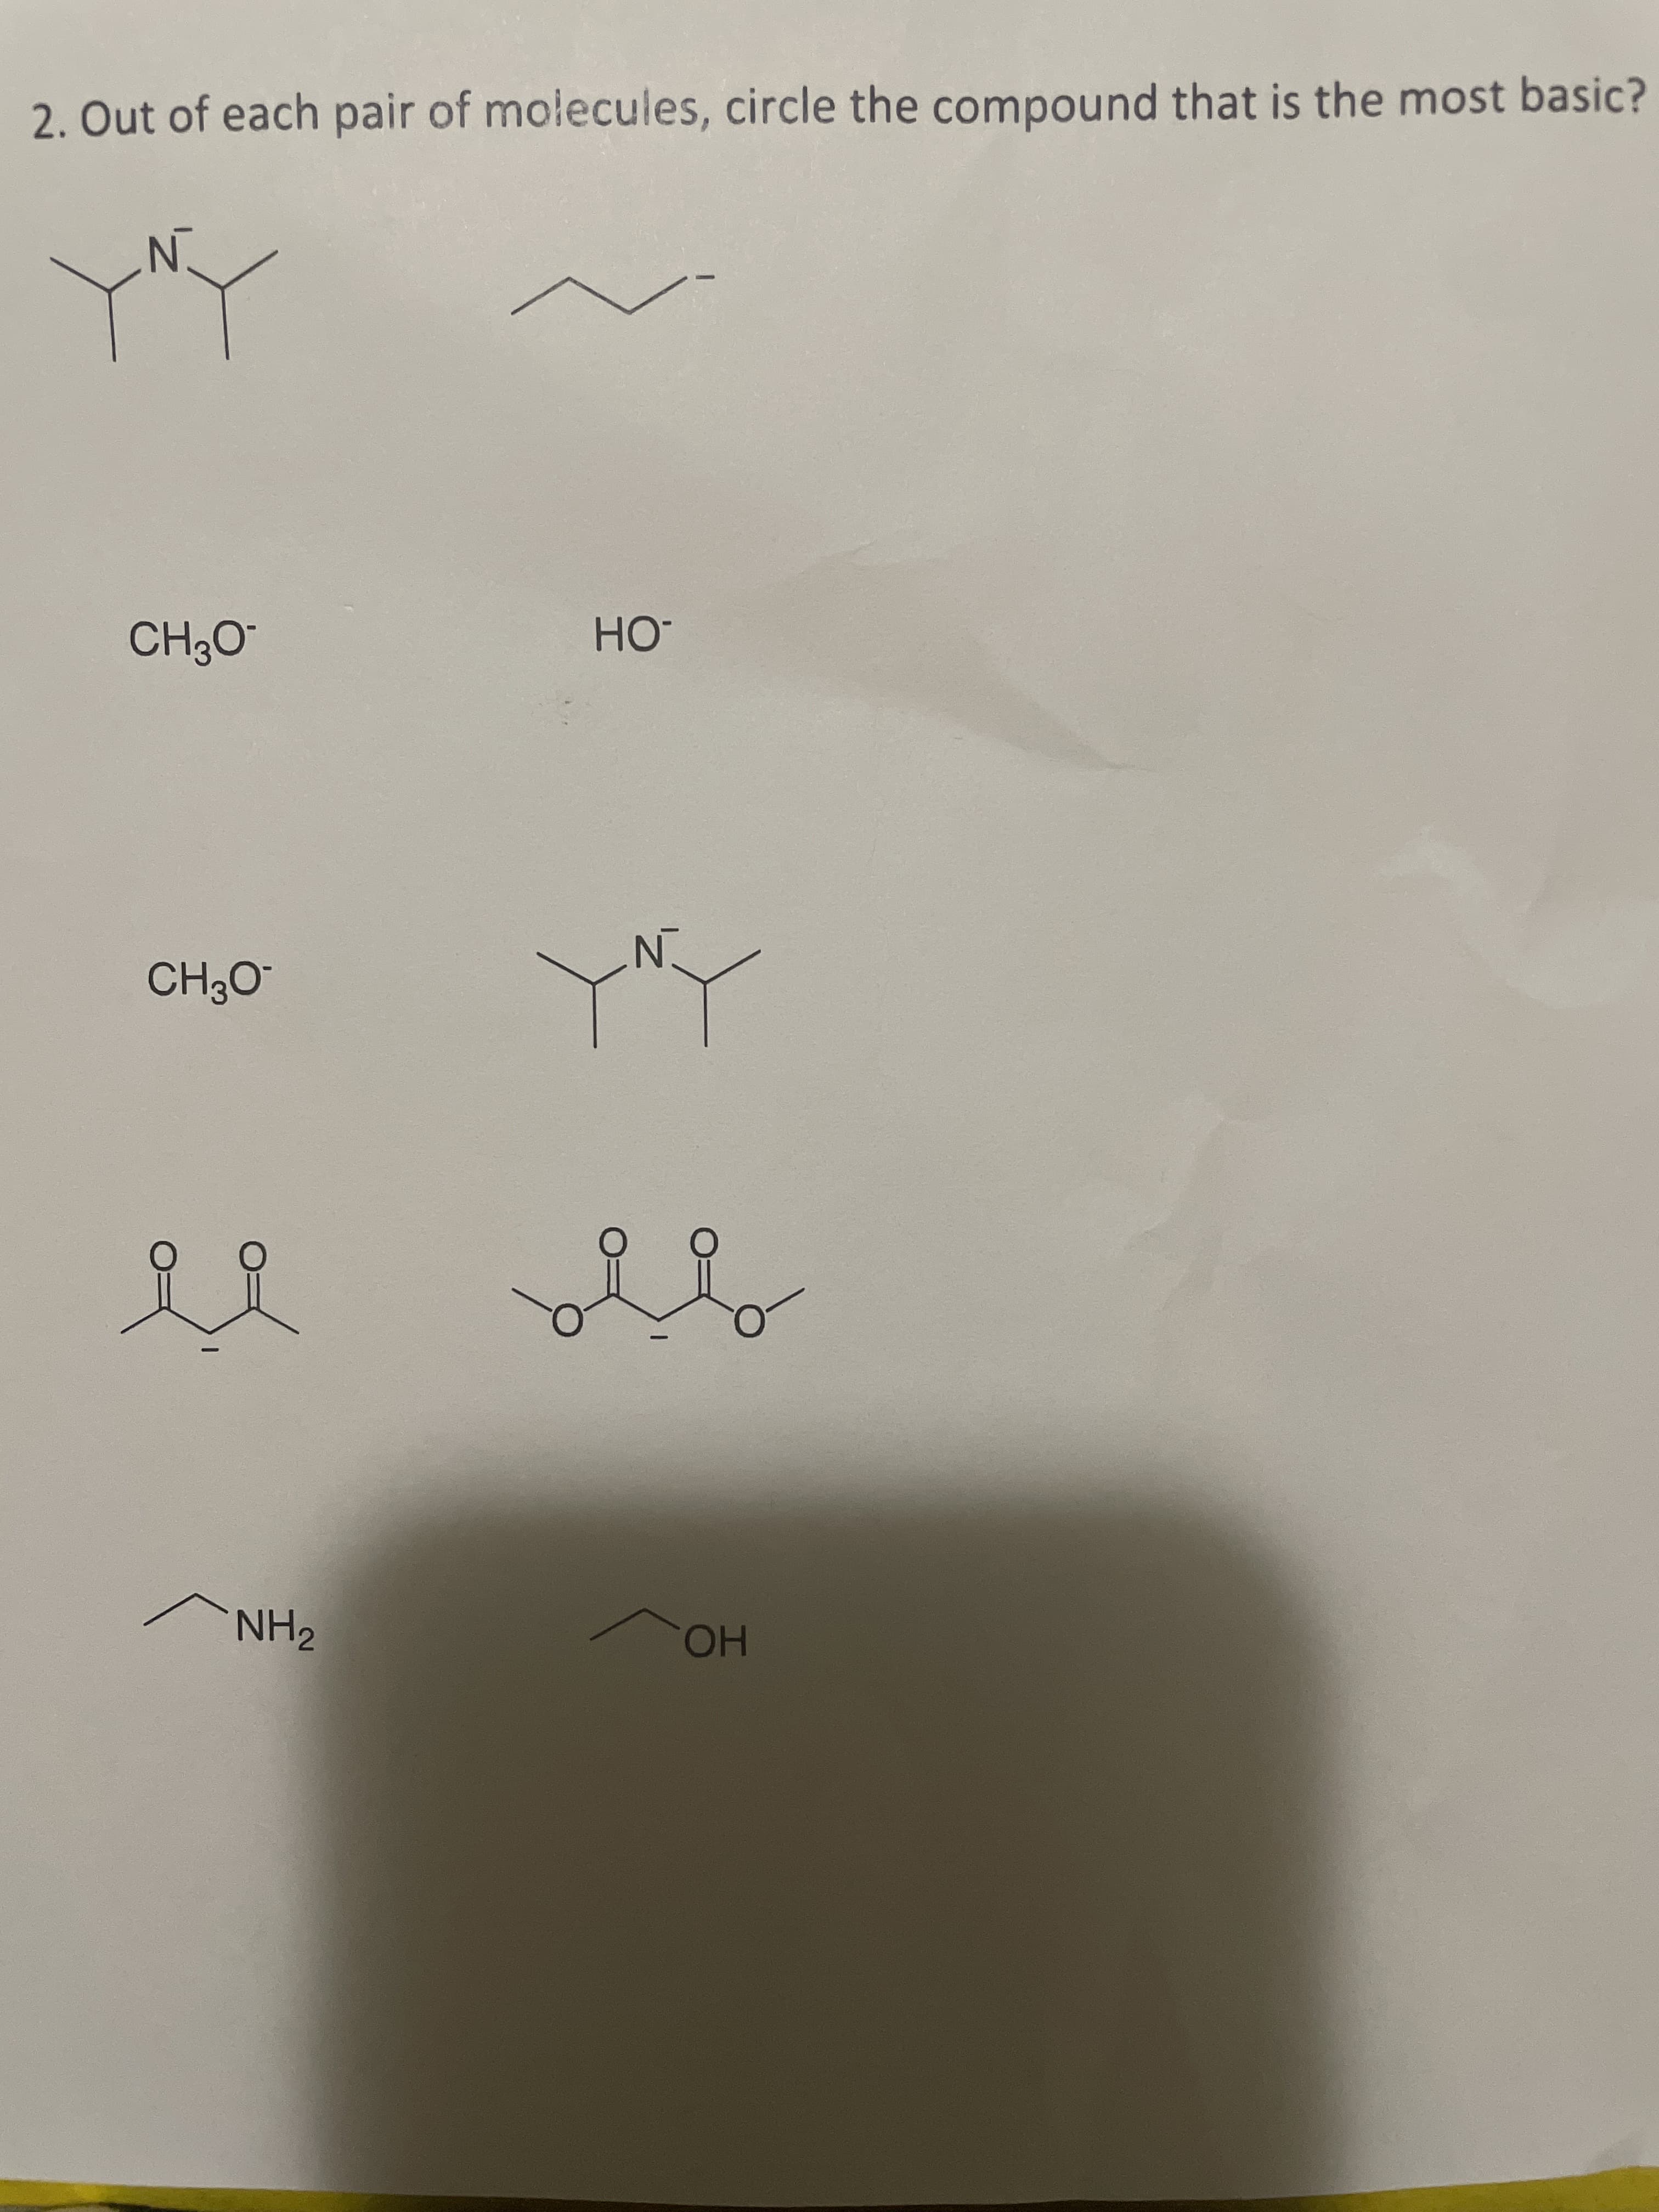 2. Out of each pair of molecules, circle the compound that is the most basic?
-HO-
HO.
NH2
